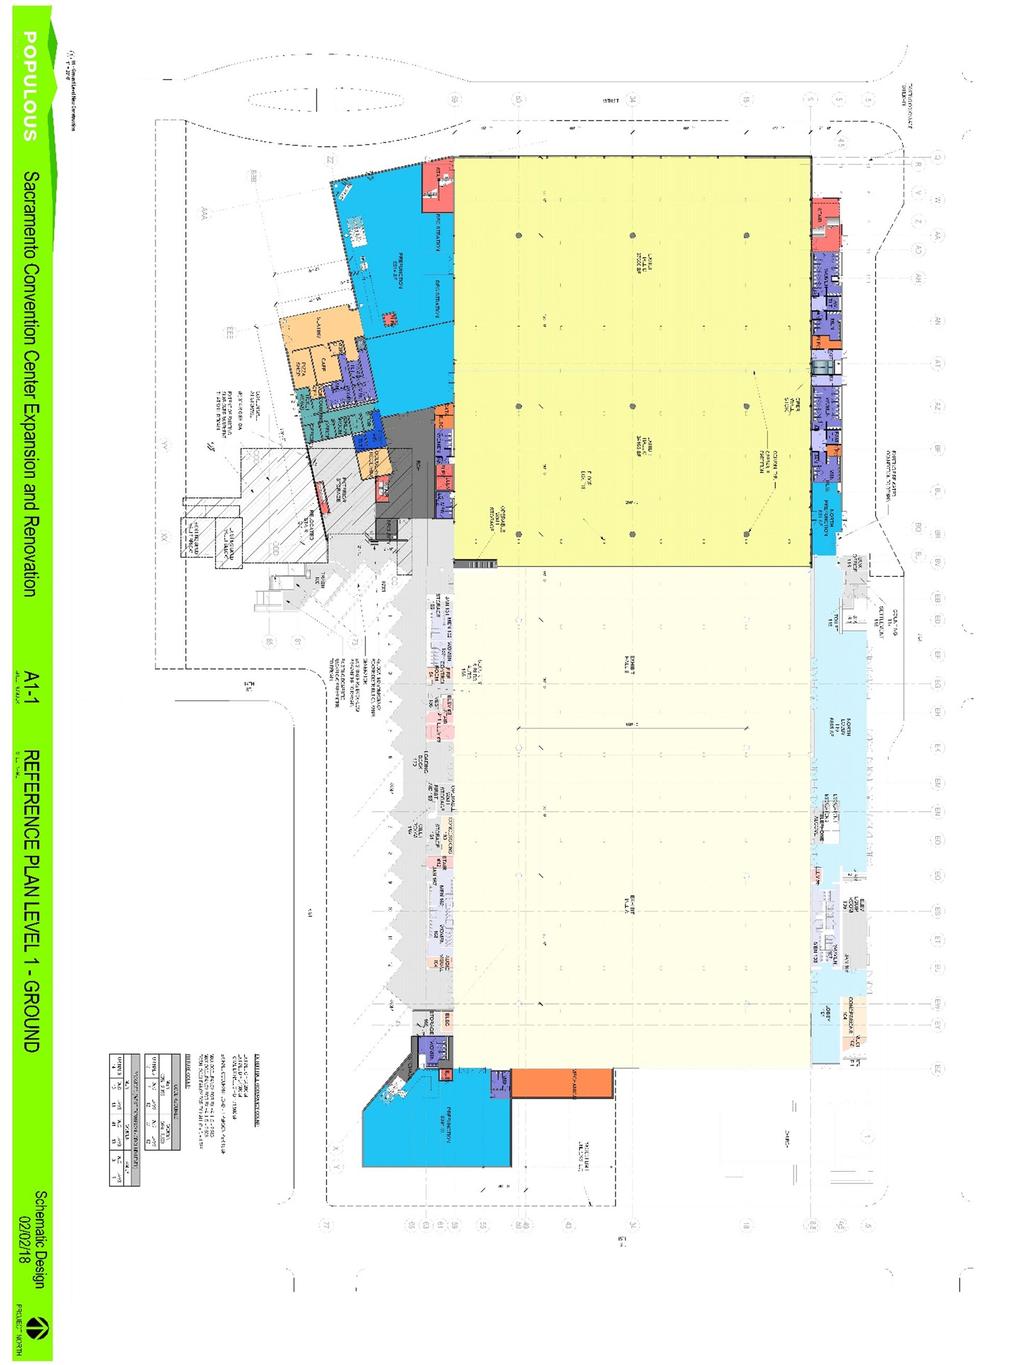 Figure 9 Convention Center Floor Plan (Ground Level) Legend: New Lobby Areas Existing Lobby